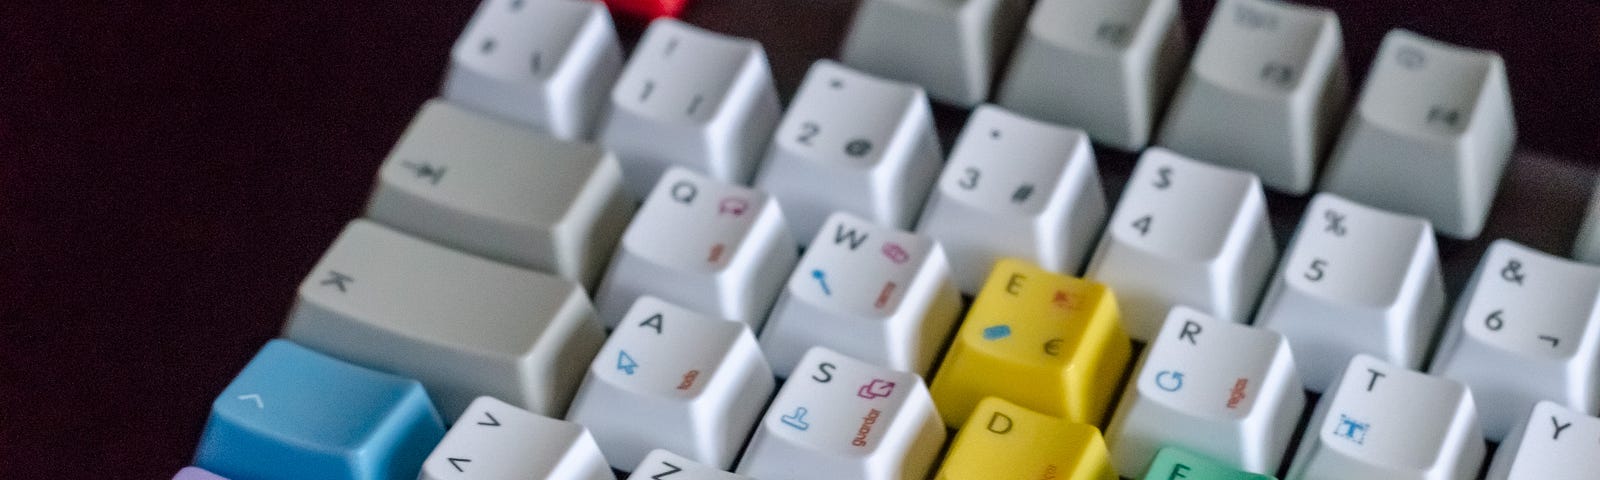 Computer keyboard with colourful keys sitting on a dark background.